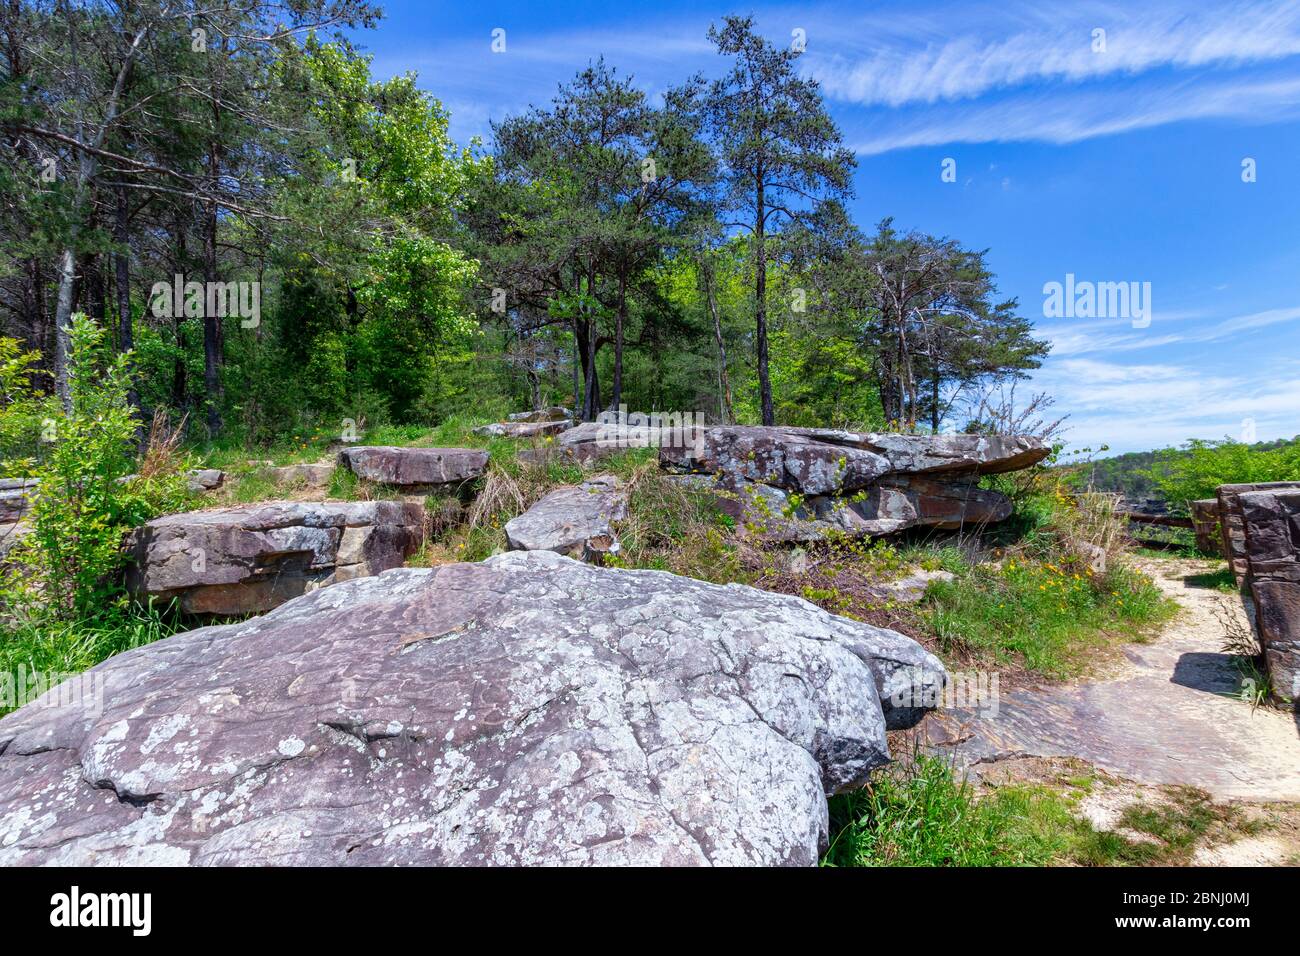 Rocks along an outlook stop along the scenic highway at Little River Canyon National Preserve Stock Photo